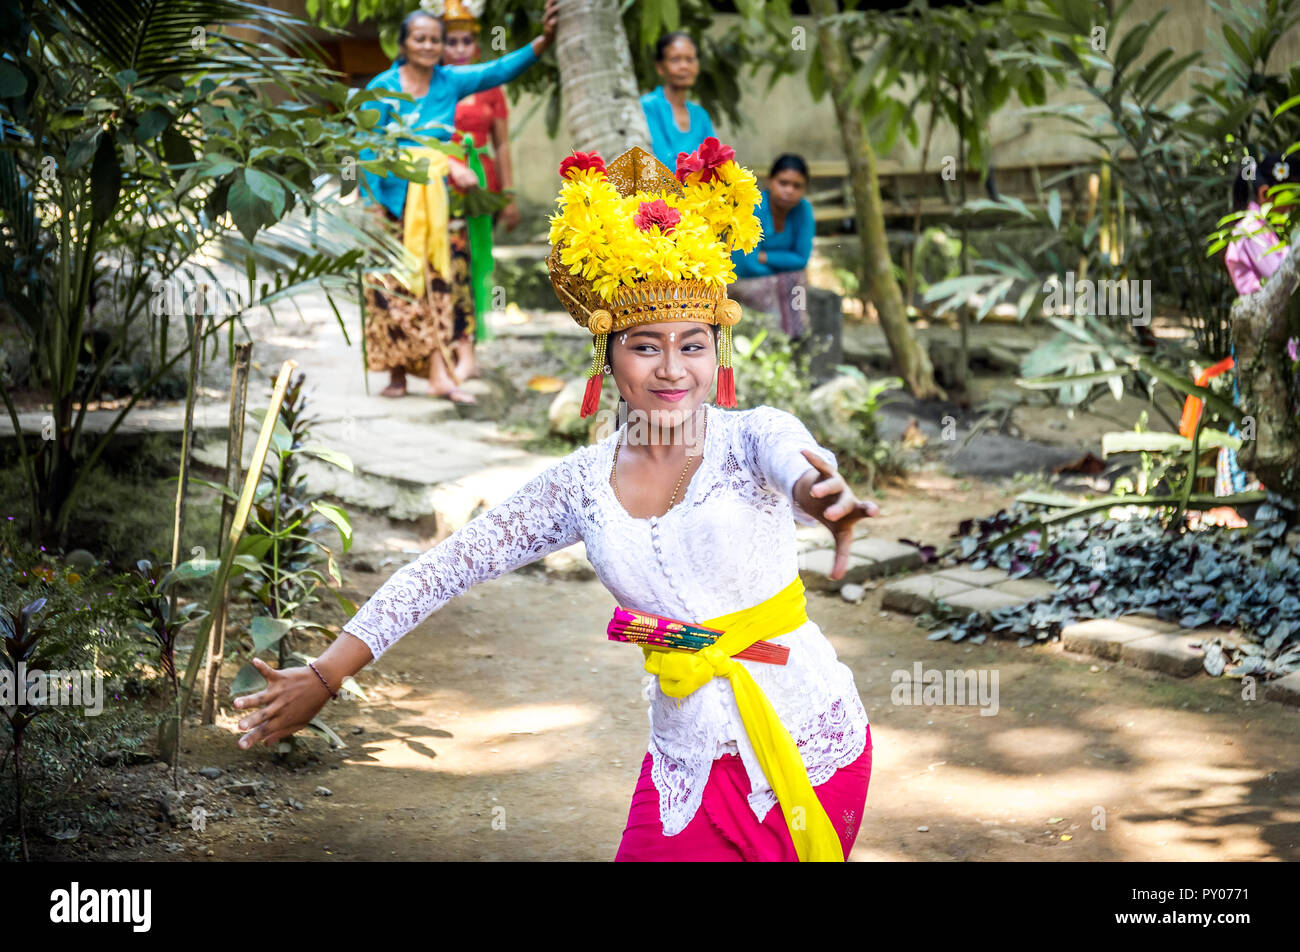 BALI, INDONESIA - APRIL 25, 2018: Balinese dancer wearing beautiful outfit performing on Bali Island, Indonesia Stock Photo